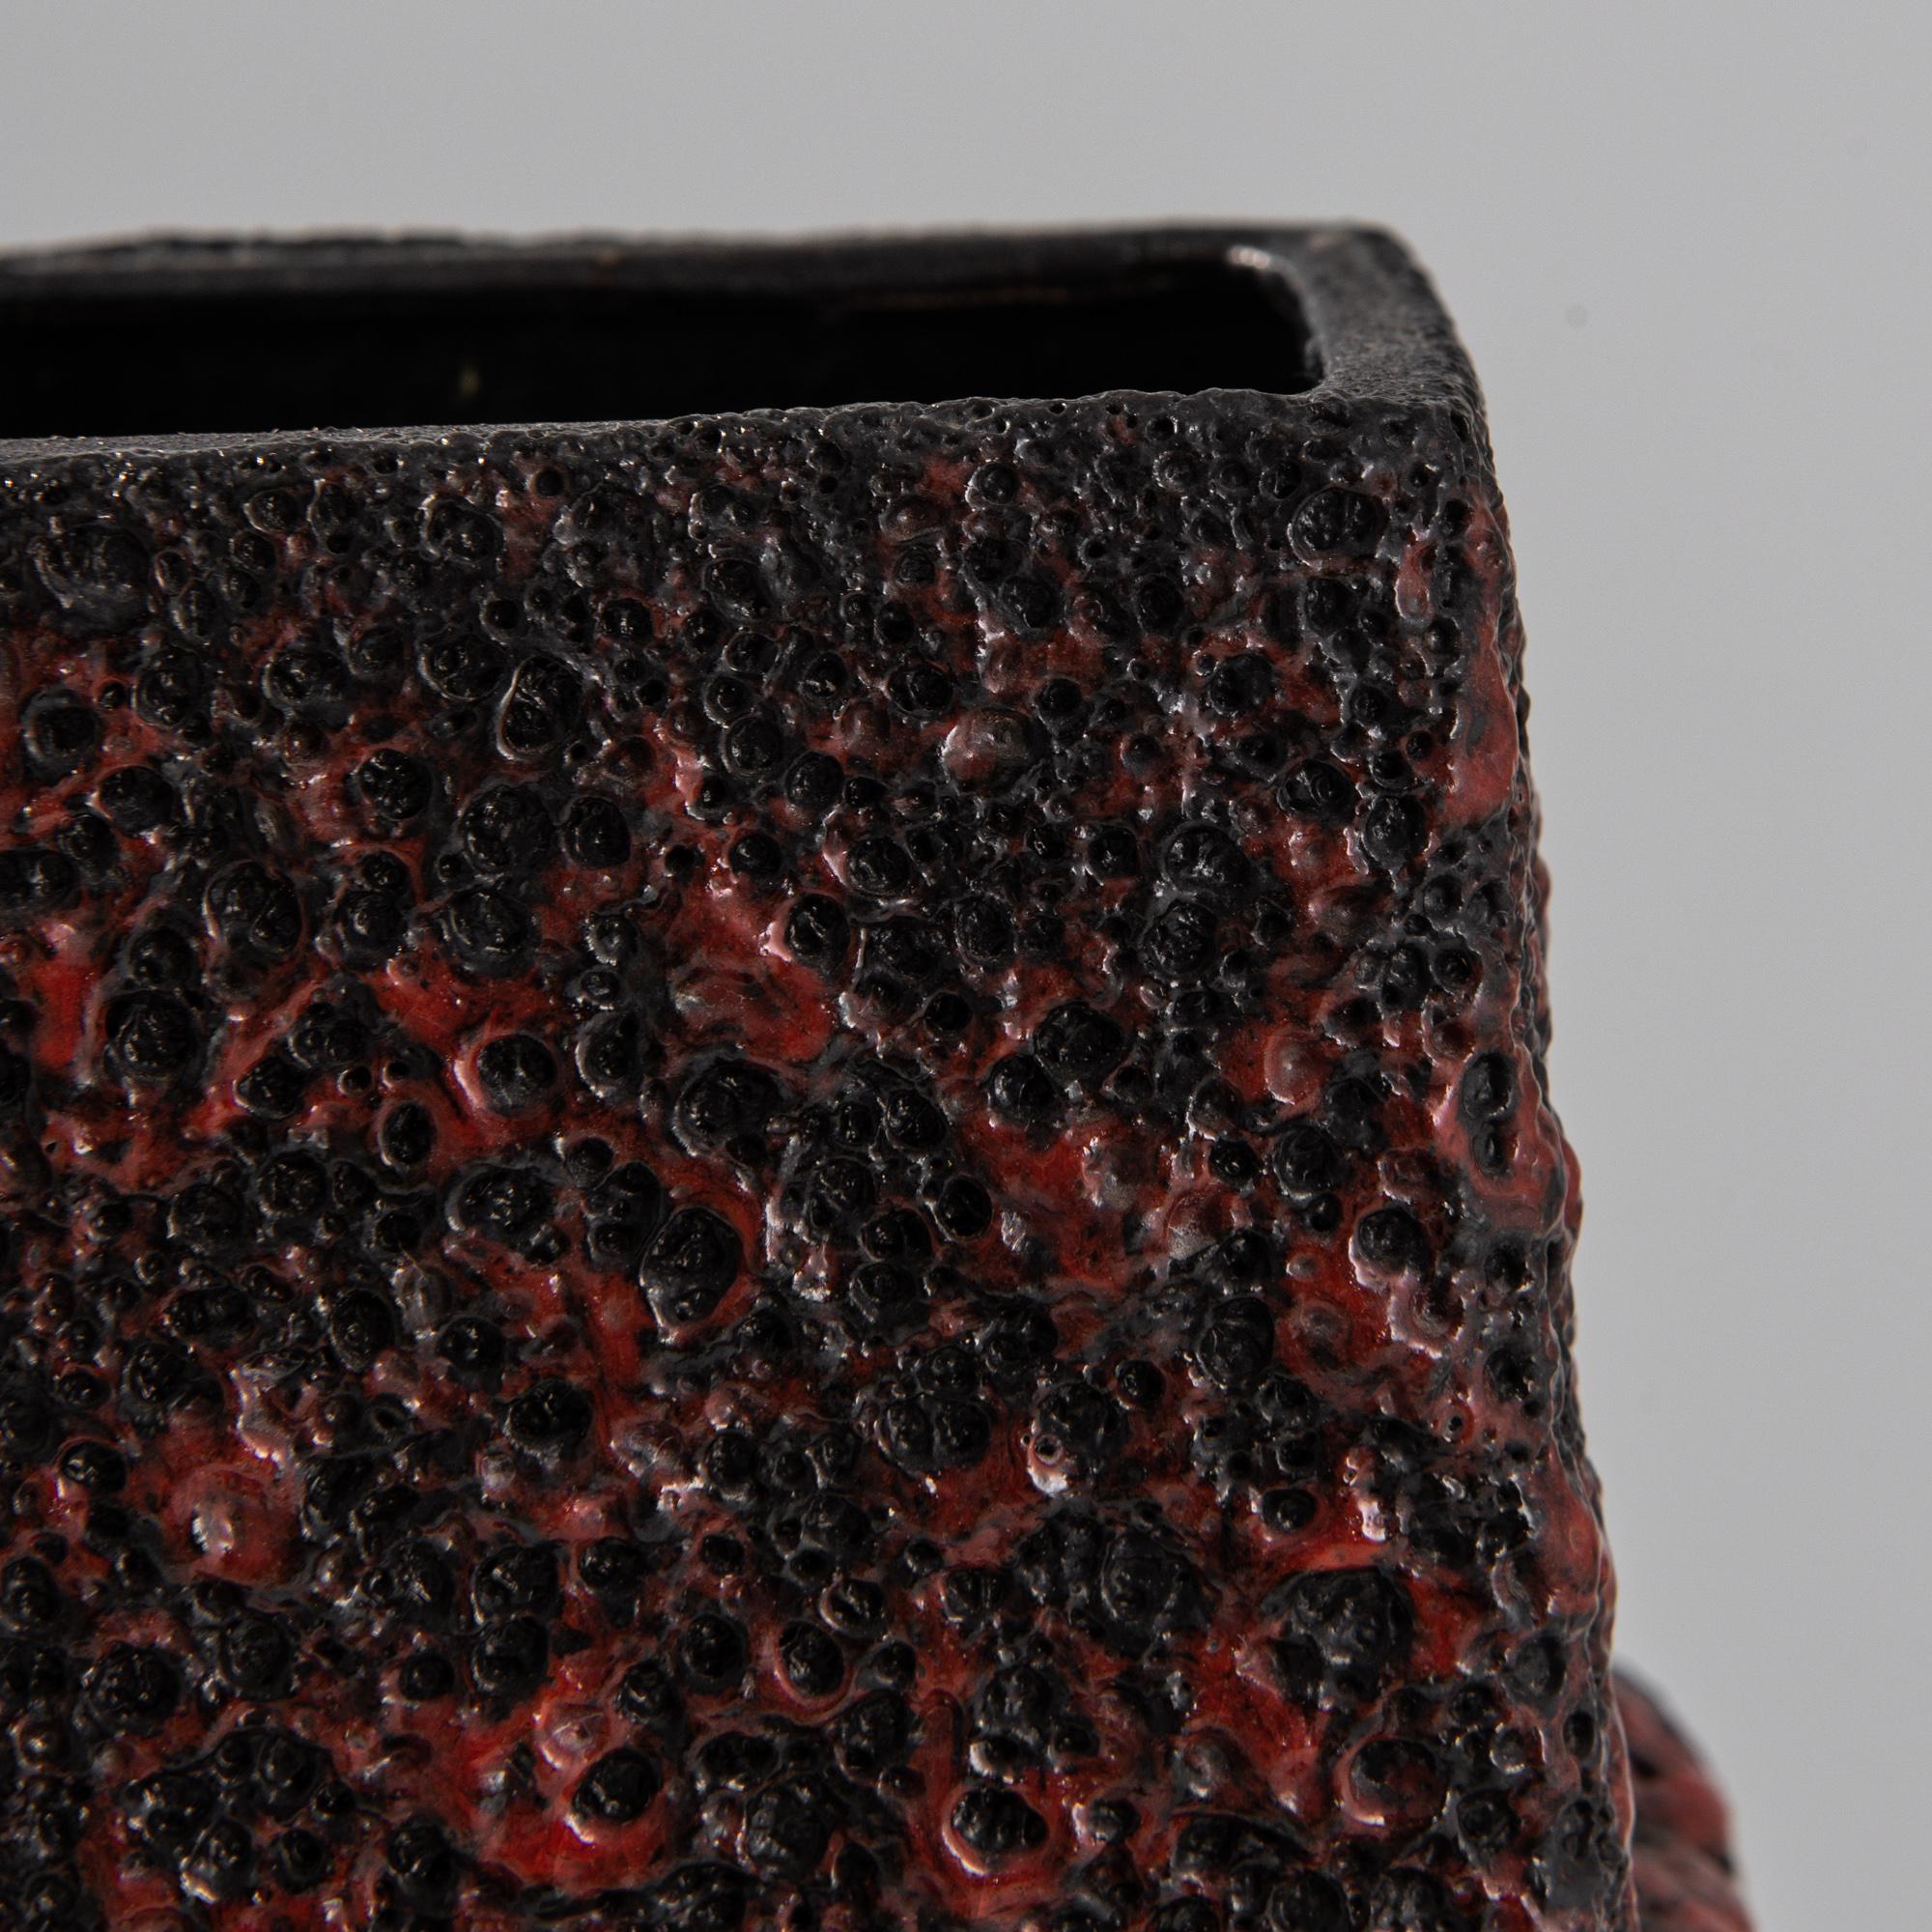 Encrusted with a tactile red glaze, carmine infused with sooty black recalls the heat of roiling lava. Frozen in motion, the liquid laze and organic form capture the fluidity of ceramic material. An exceptional example of 1960s German mid-century